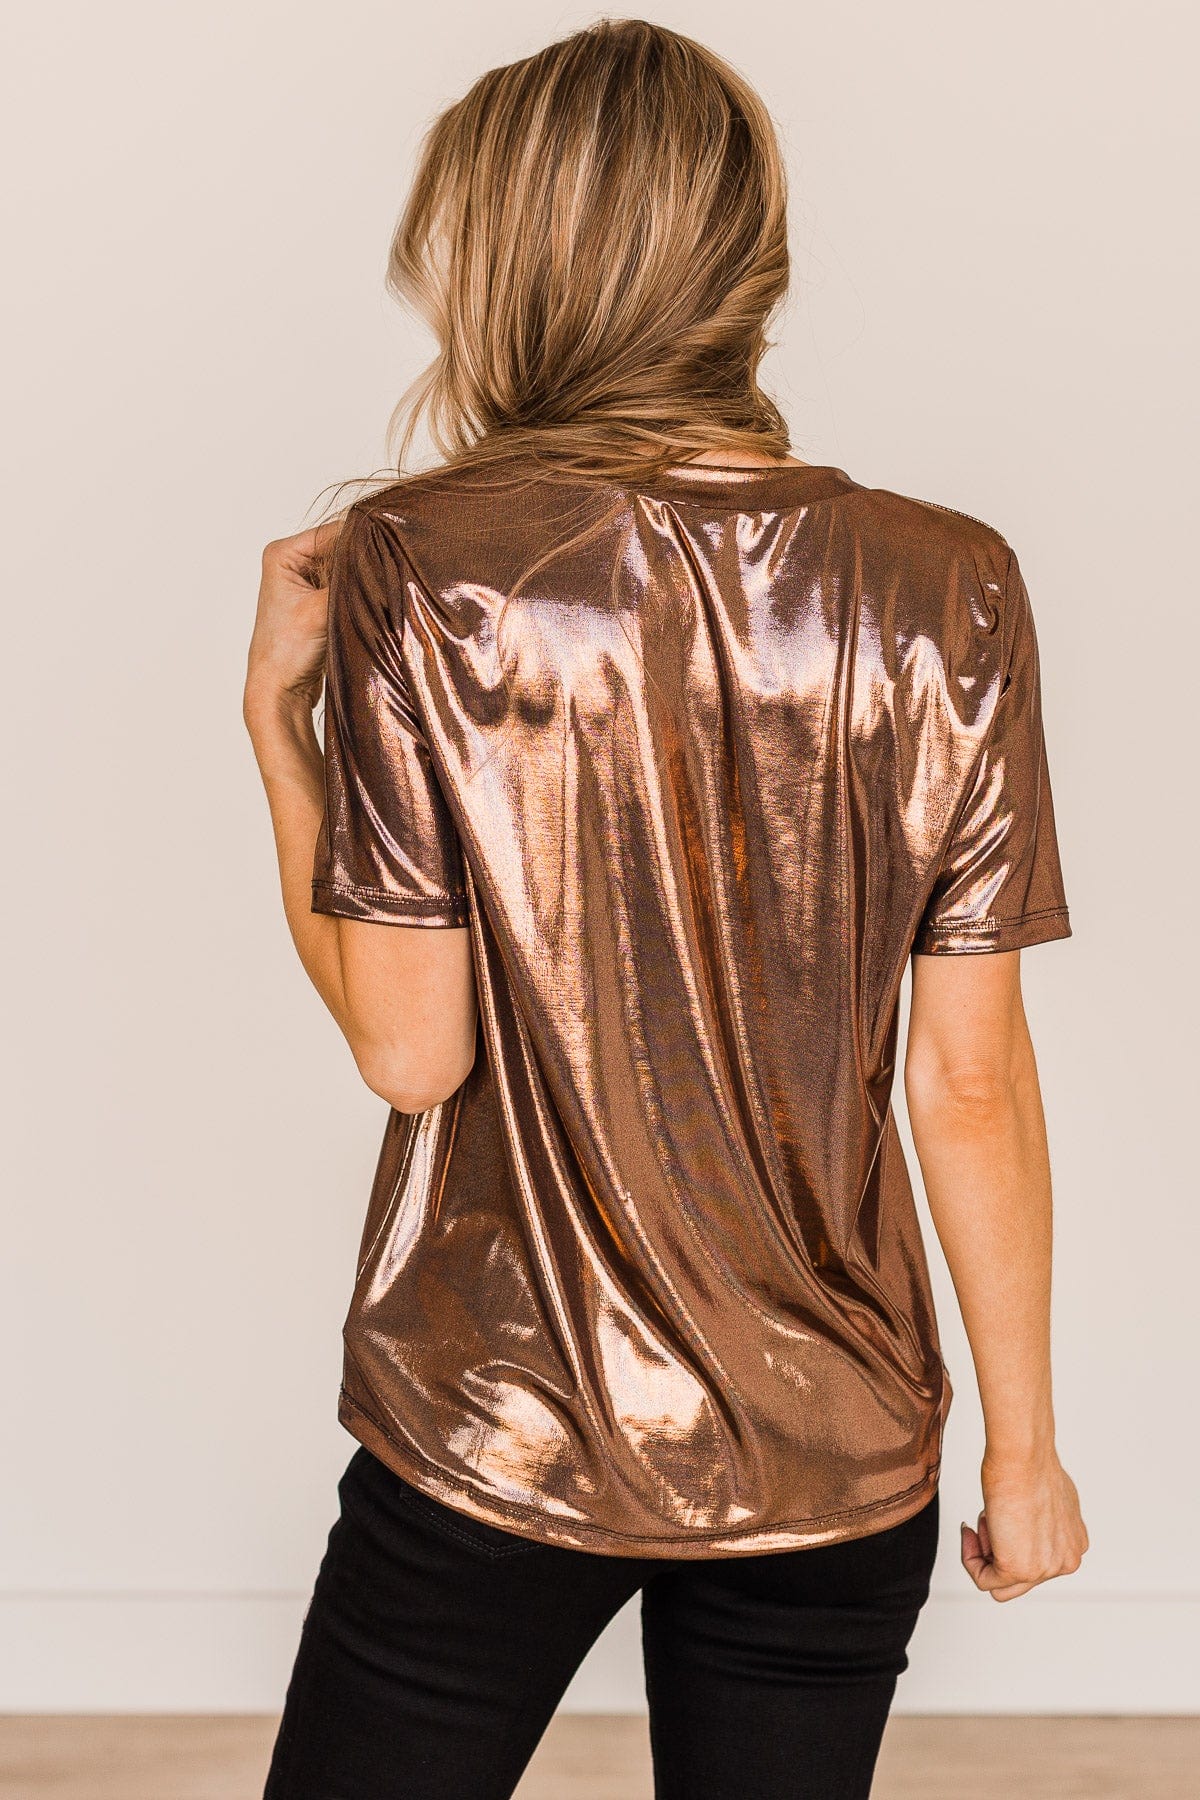 Stealing The Show Metallic Top- Copper